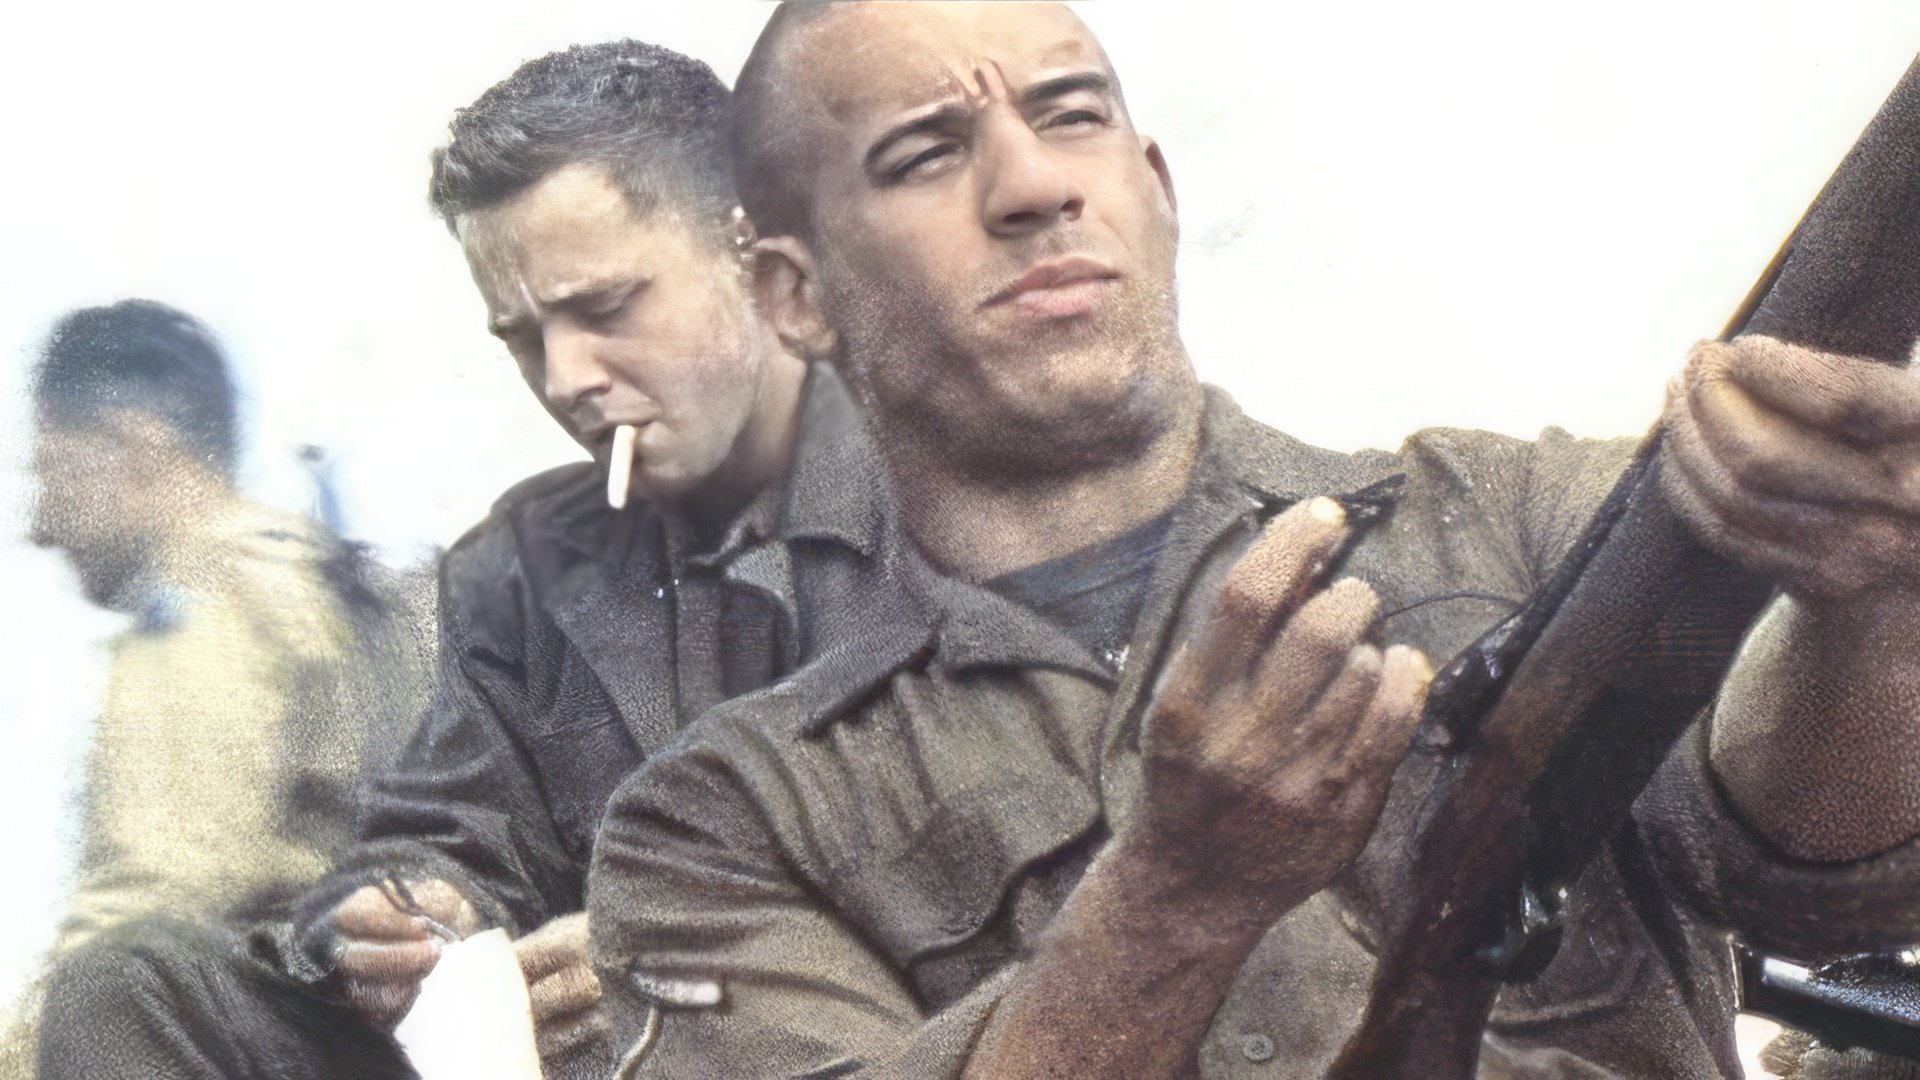 Sergeant Caprisa was the first major role of Vin Diesel